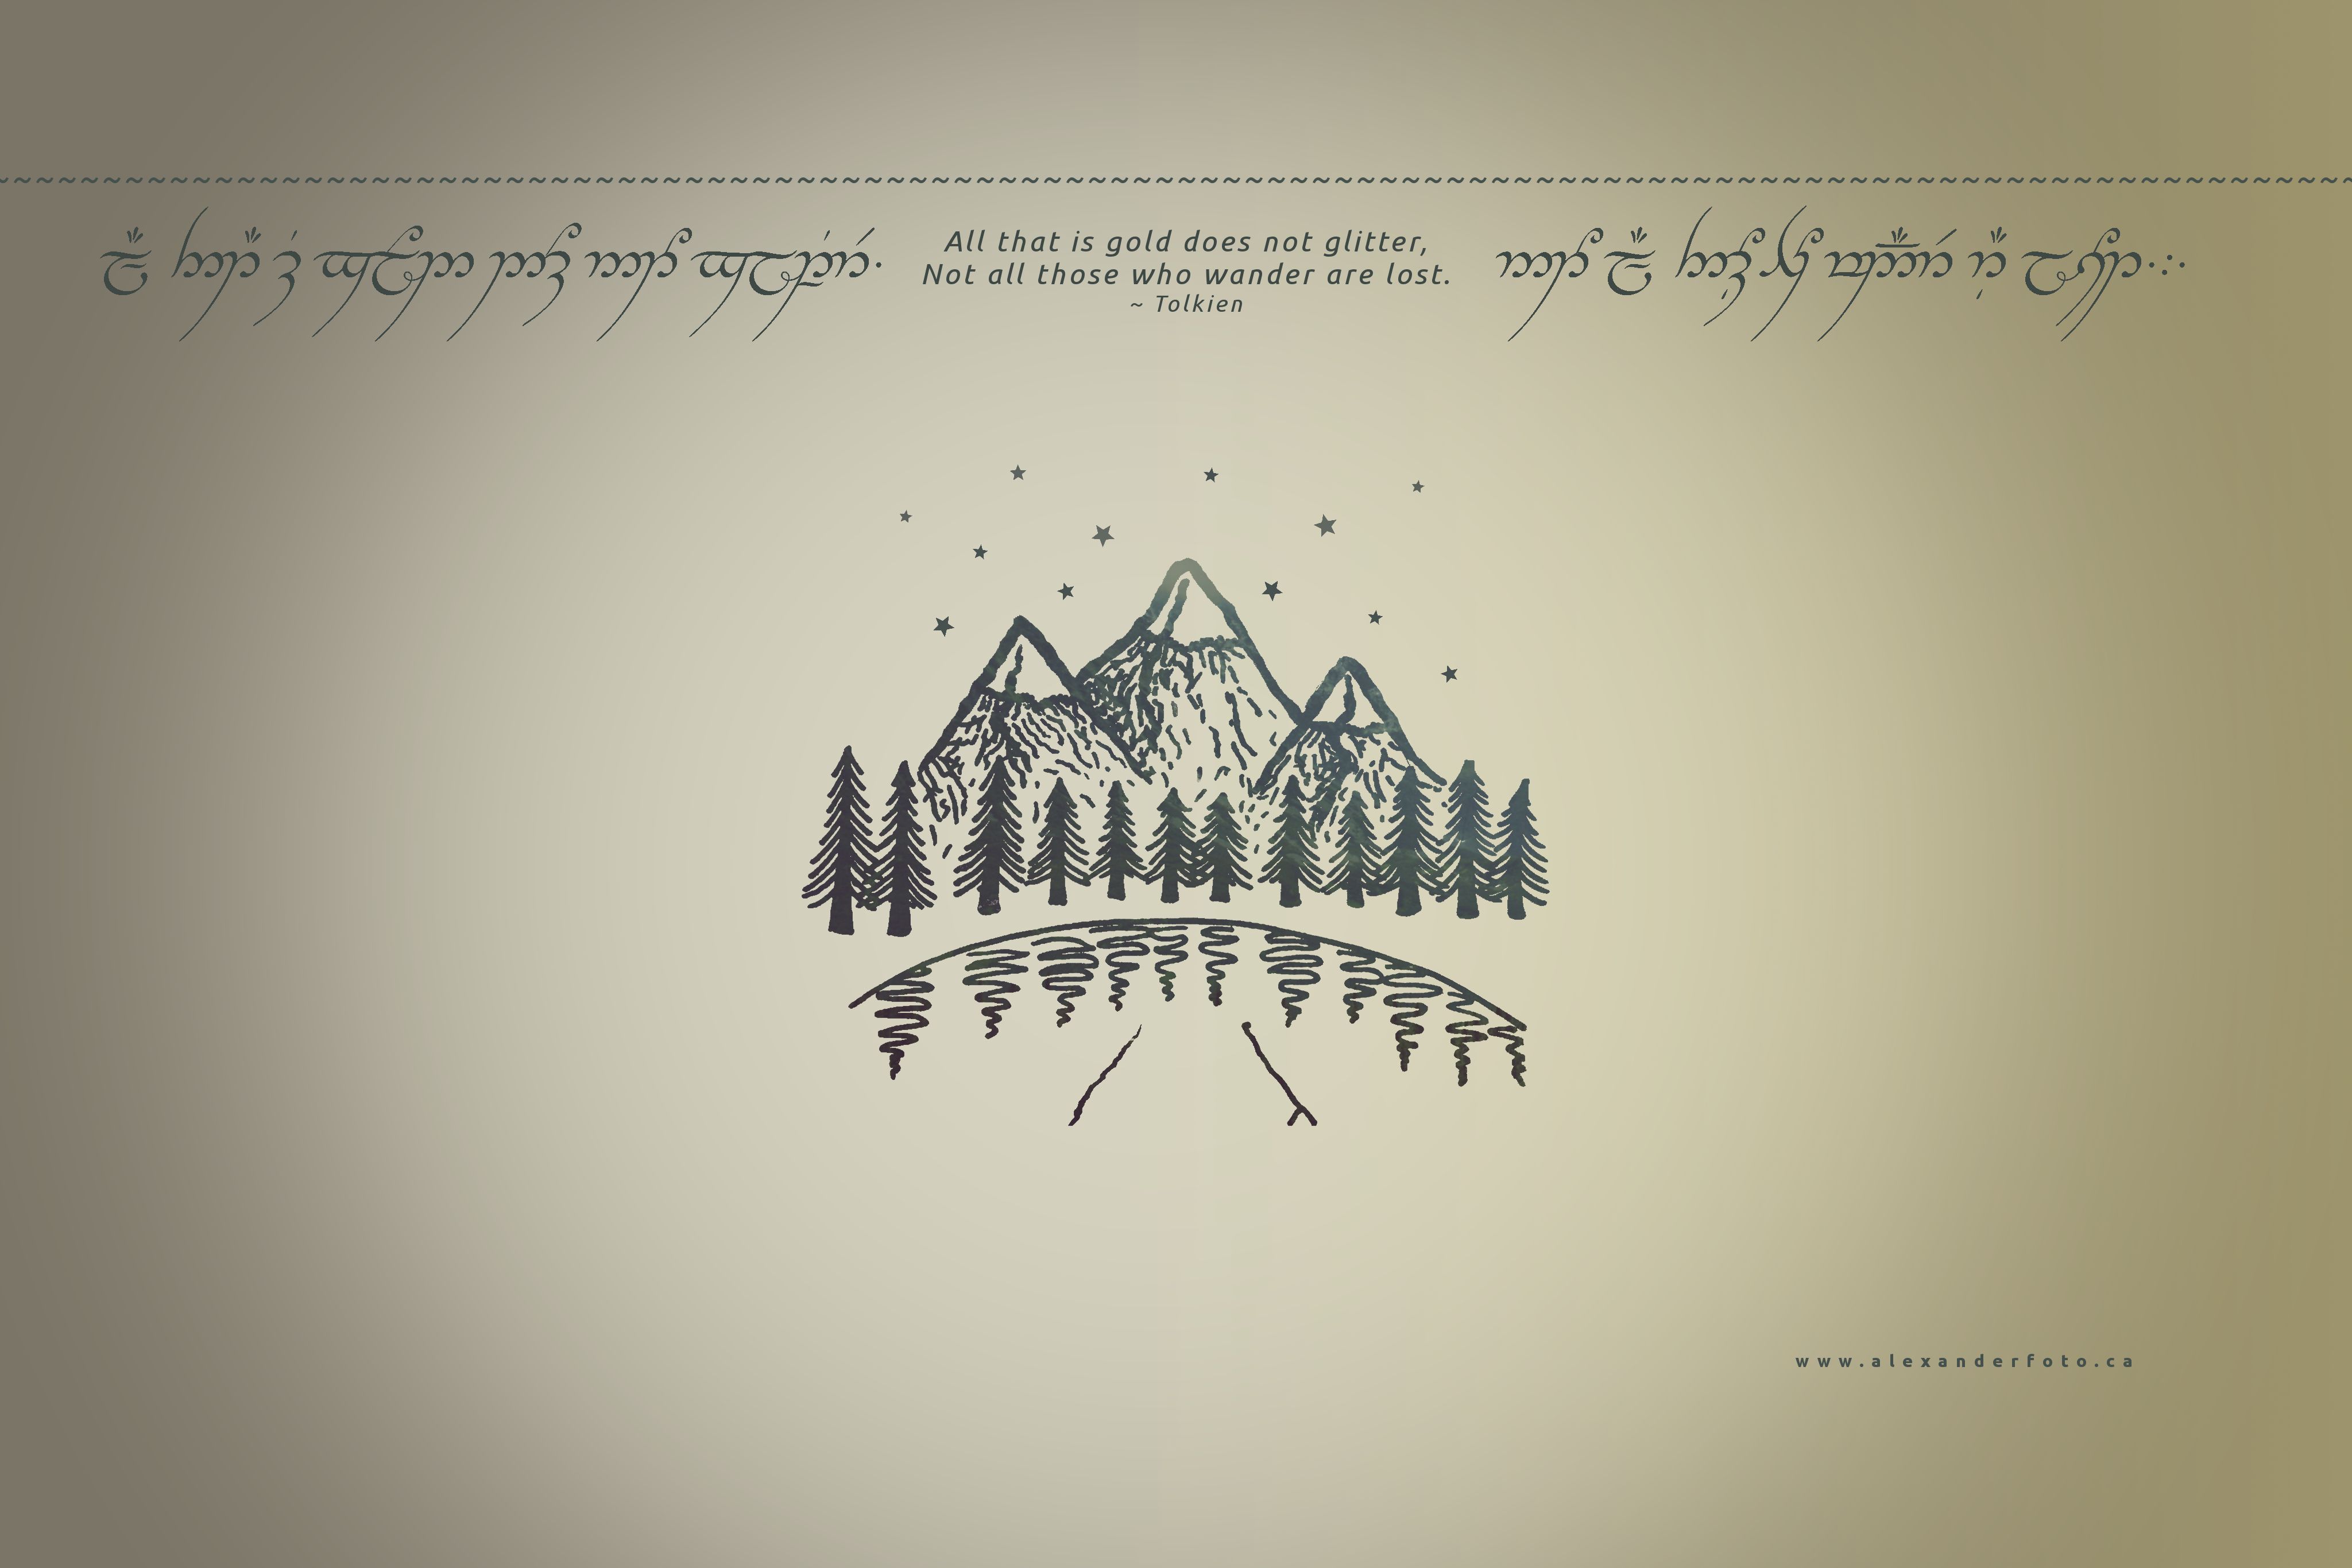 Lord of the Rings Wallpaper I made using a marker drawing